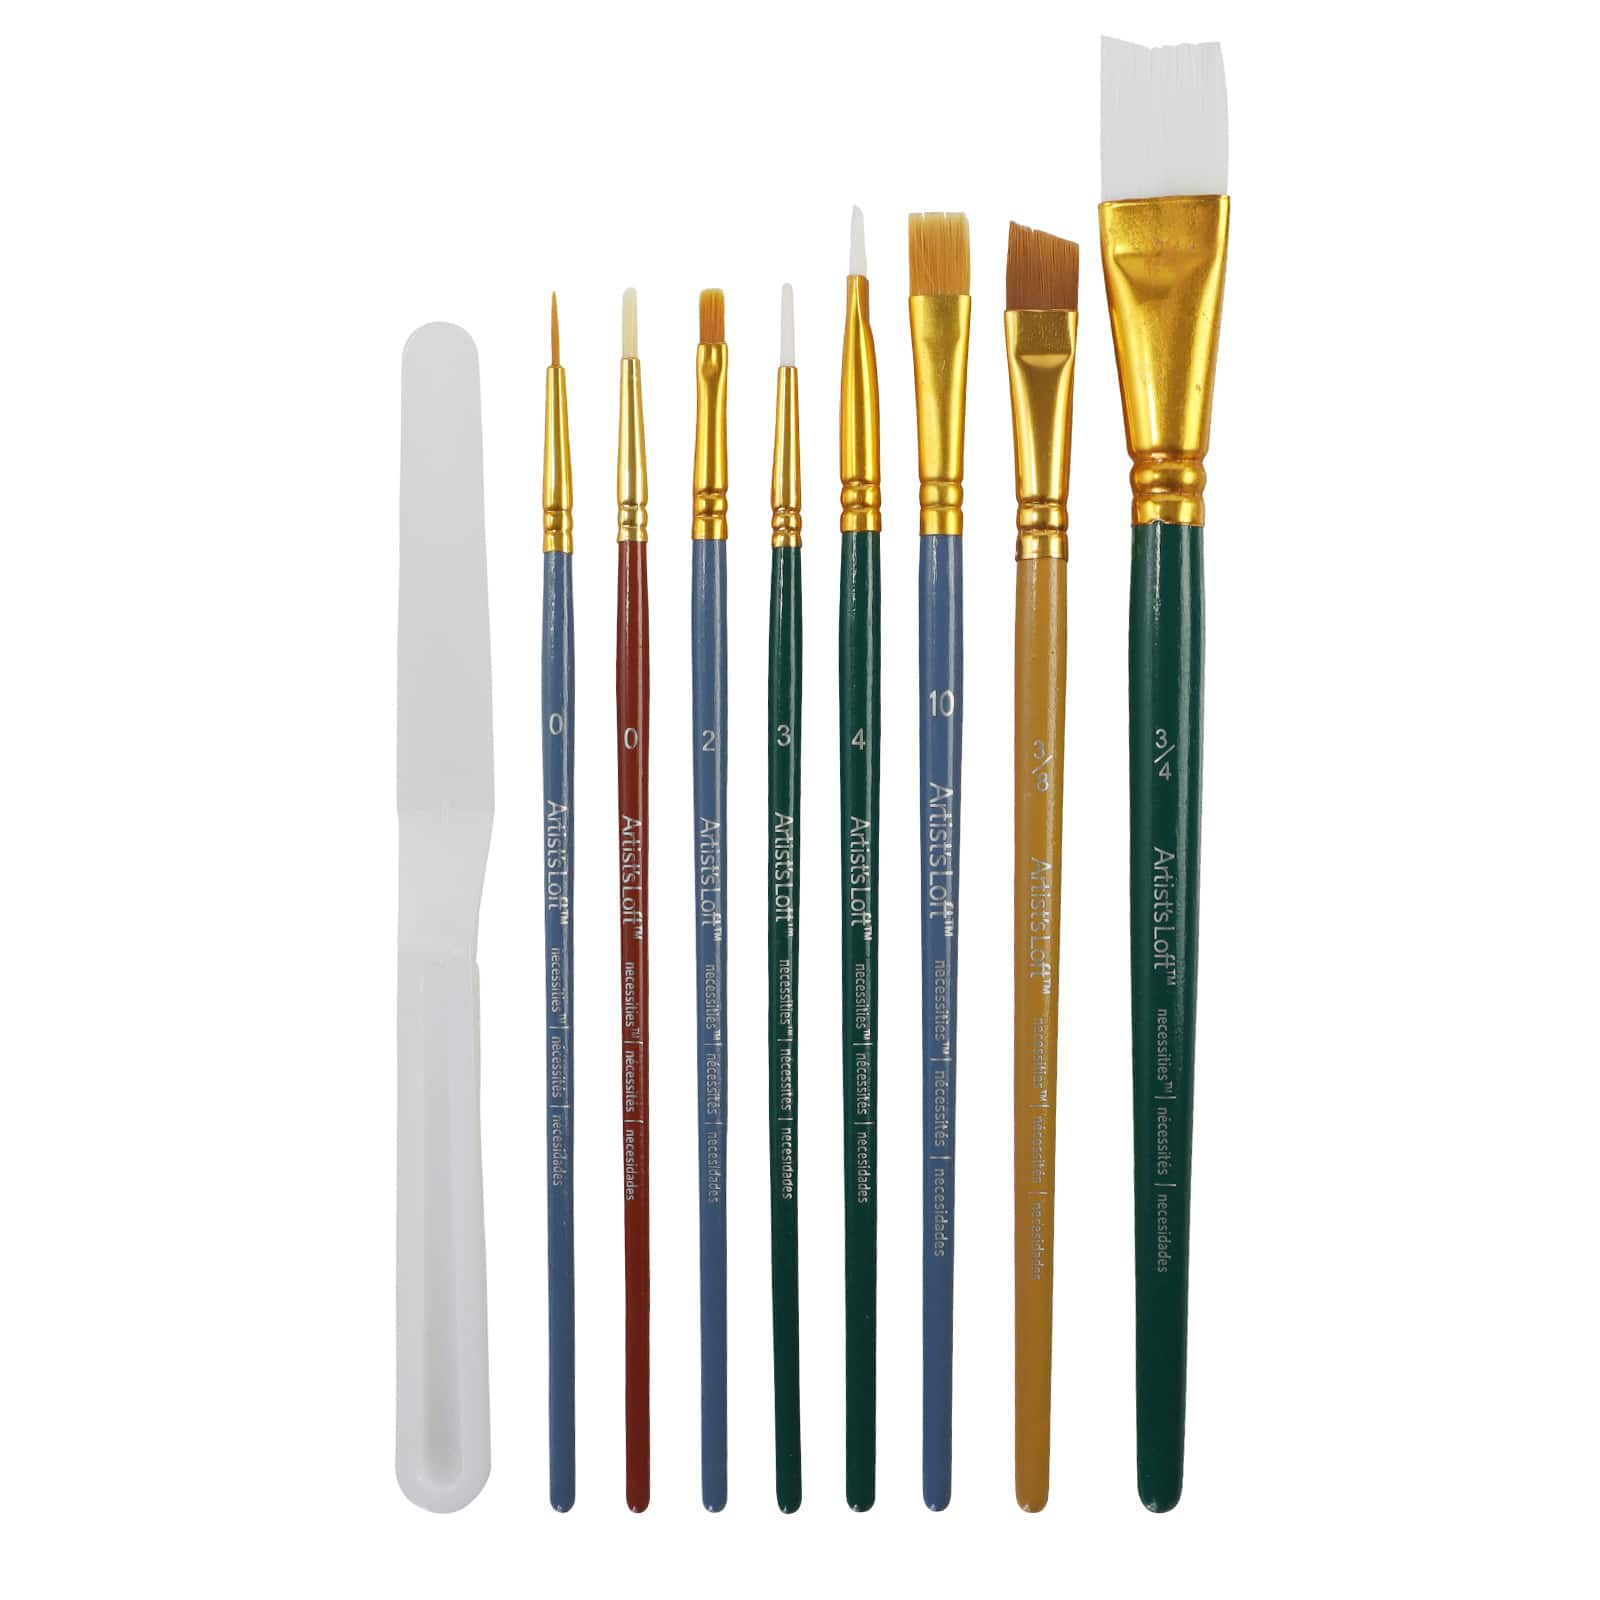 Set of 10 Artist Brushes With Carrying Case ONLY $21.00 FLASH $14.95